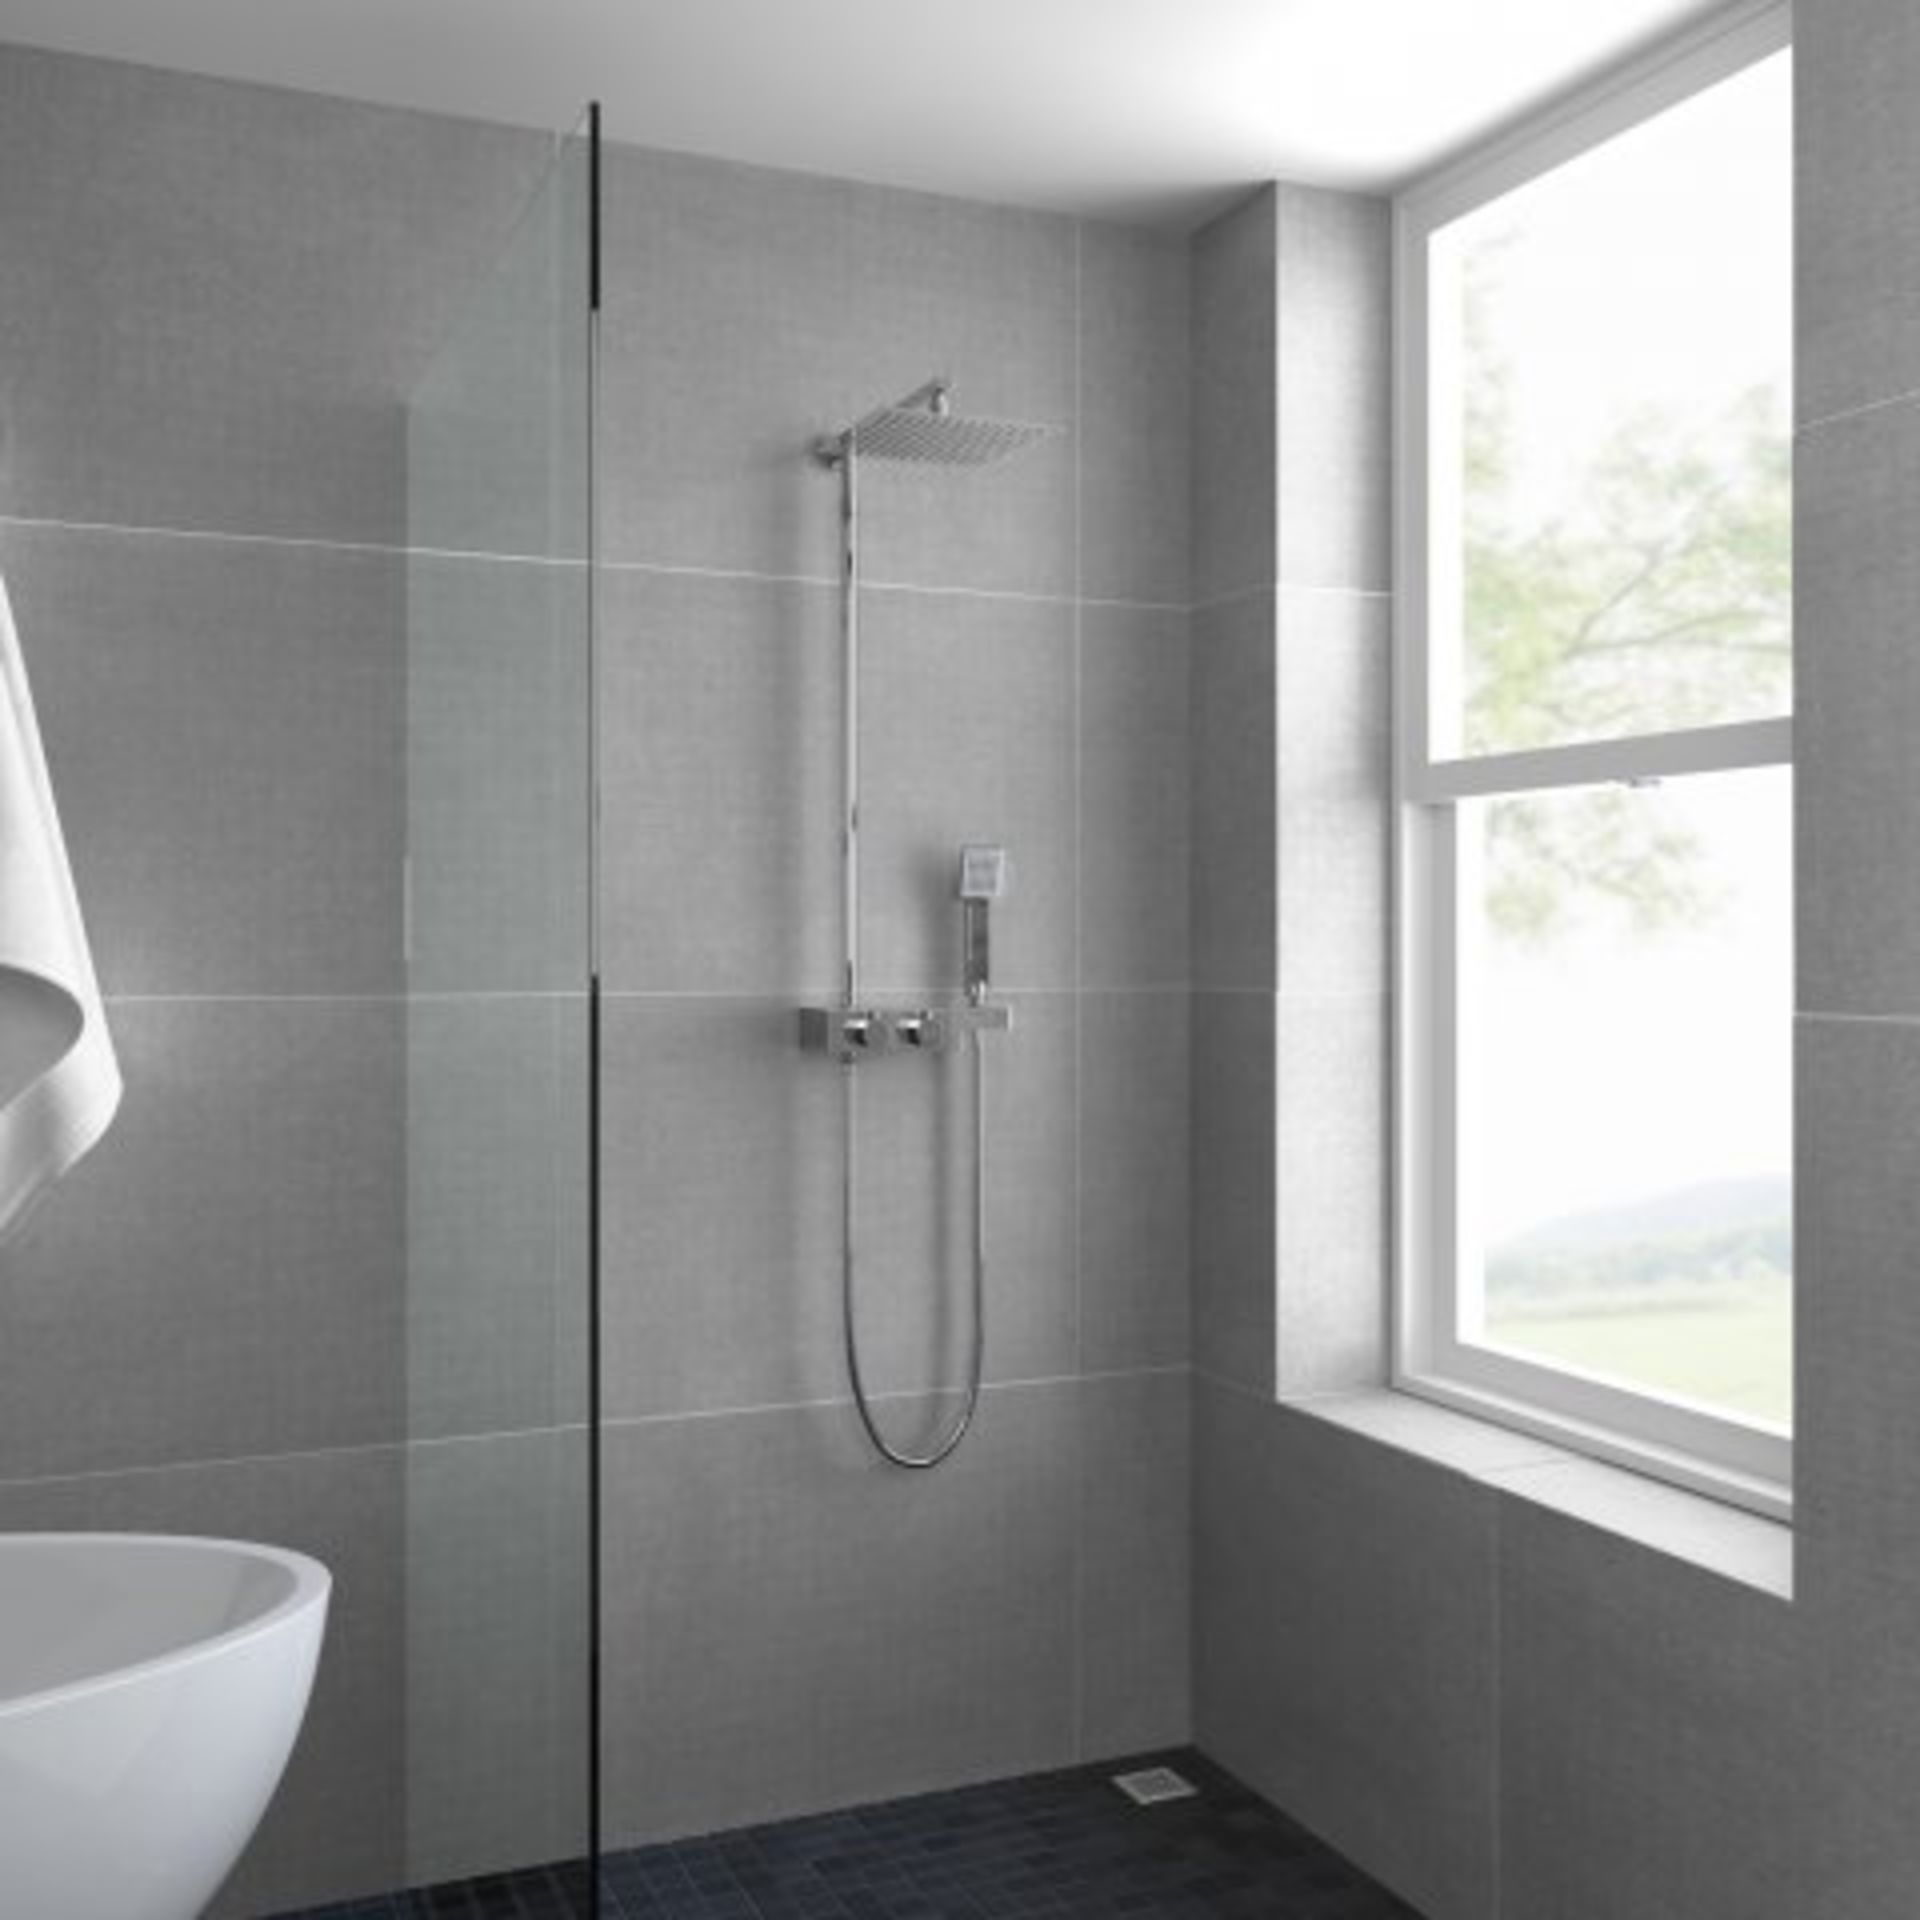 (2) 250mm Large Square Head Thermostatic Exposed Shower Kit, Handheld & Storage Shelf. RRP £349. - Image 2 of 5